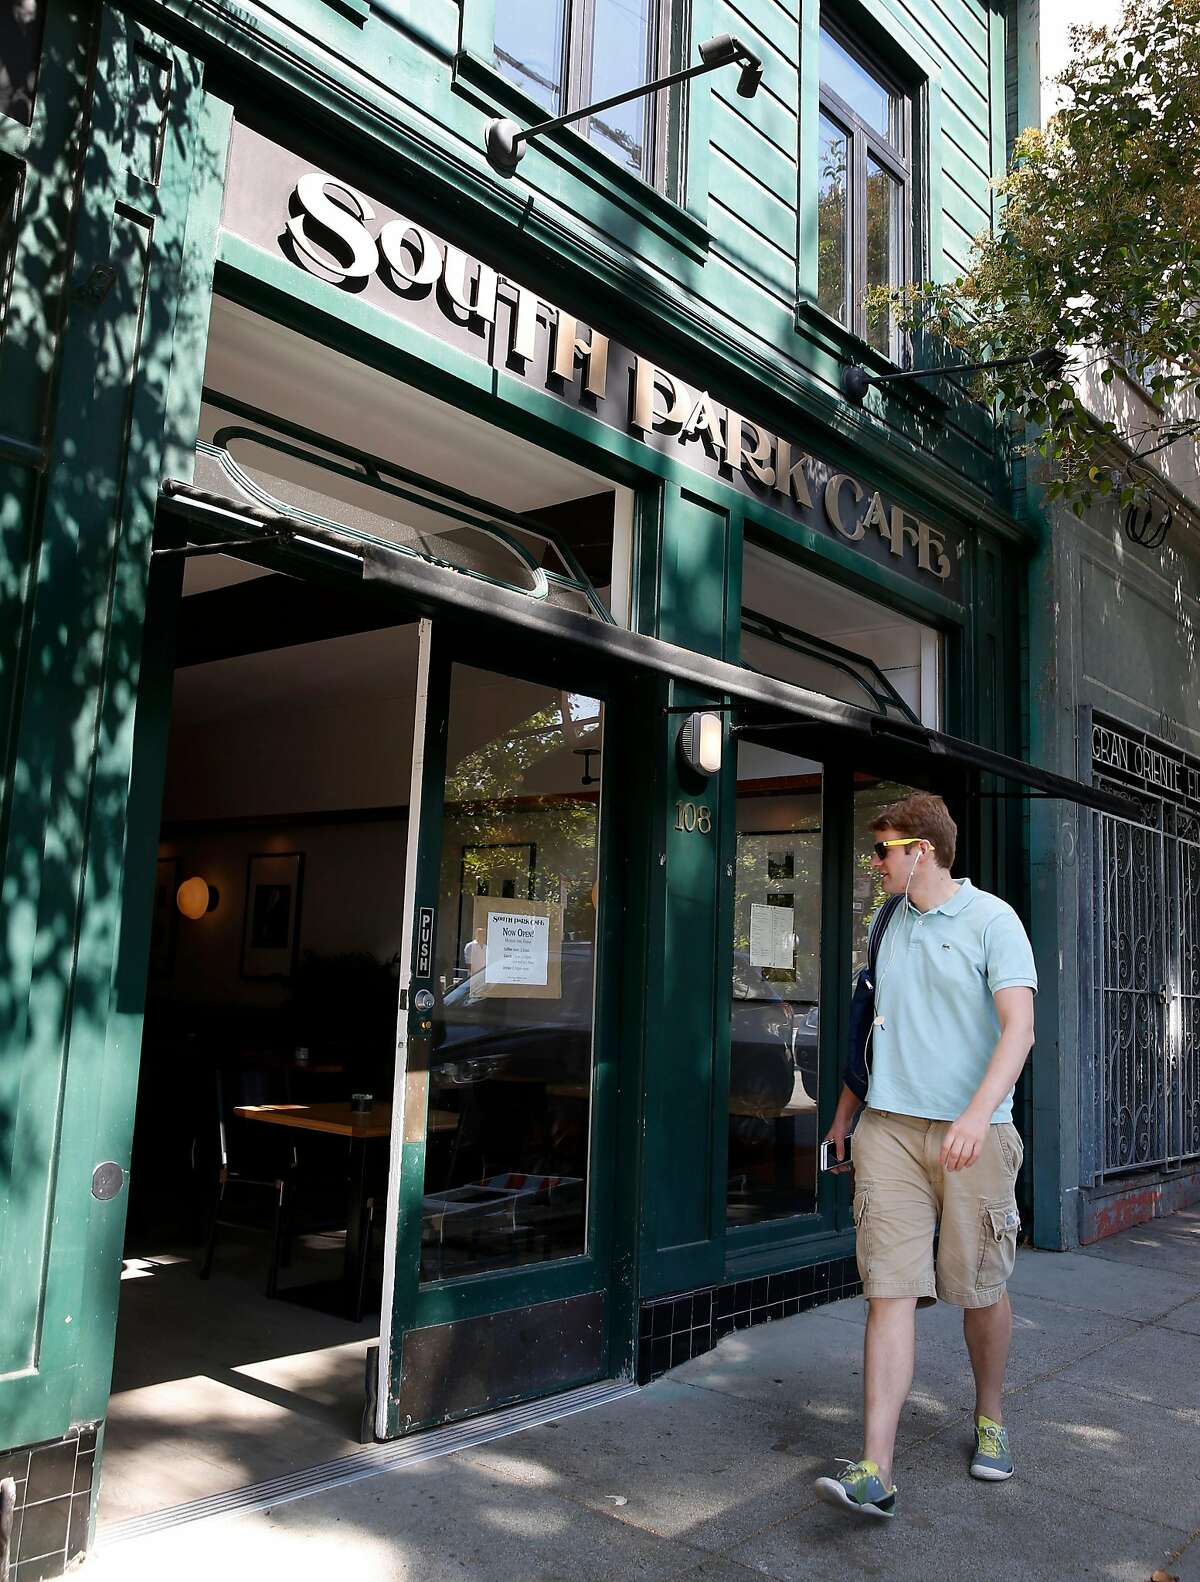 The newly reopened South Park Cafe resumes lunch service in San Francisco, Calif. on Wednesday, Sept. 11, 2019. Tech startup Brex purchased and renovated the cafe after it had been closed for over a year.